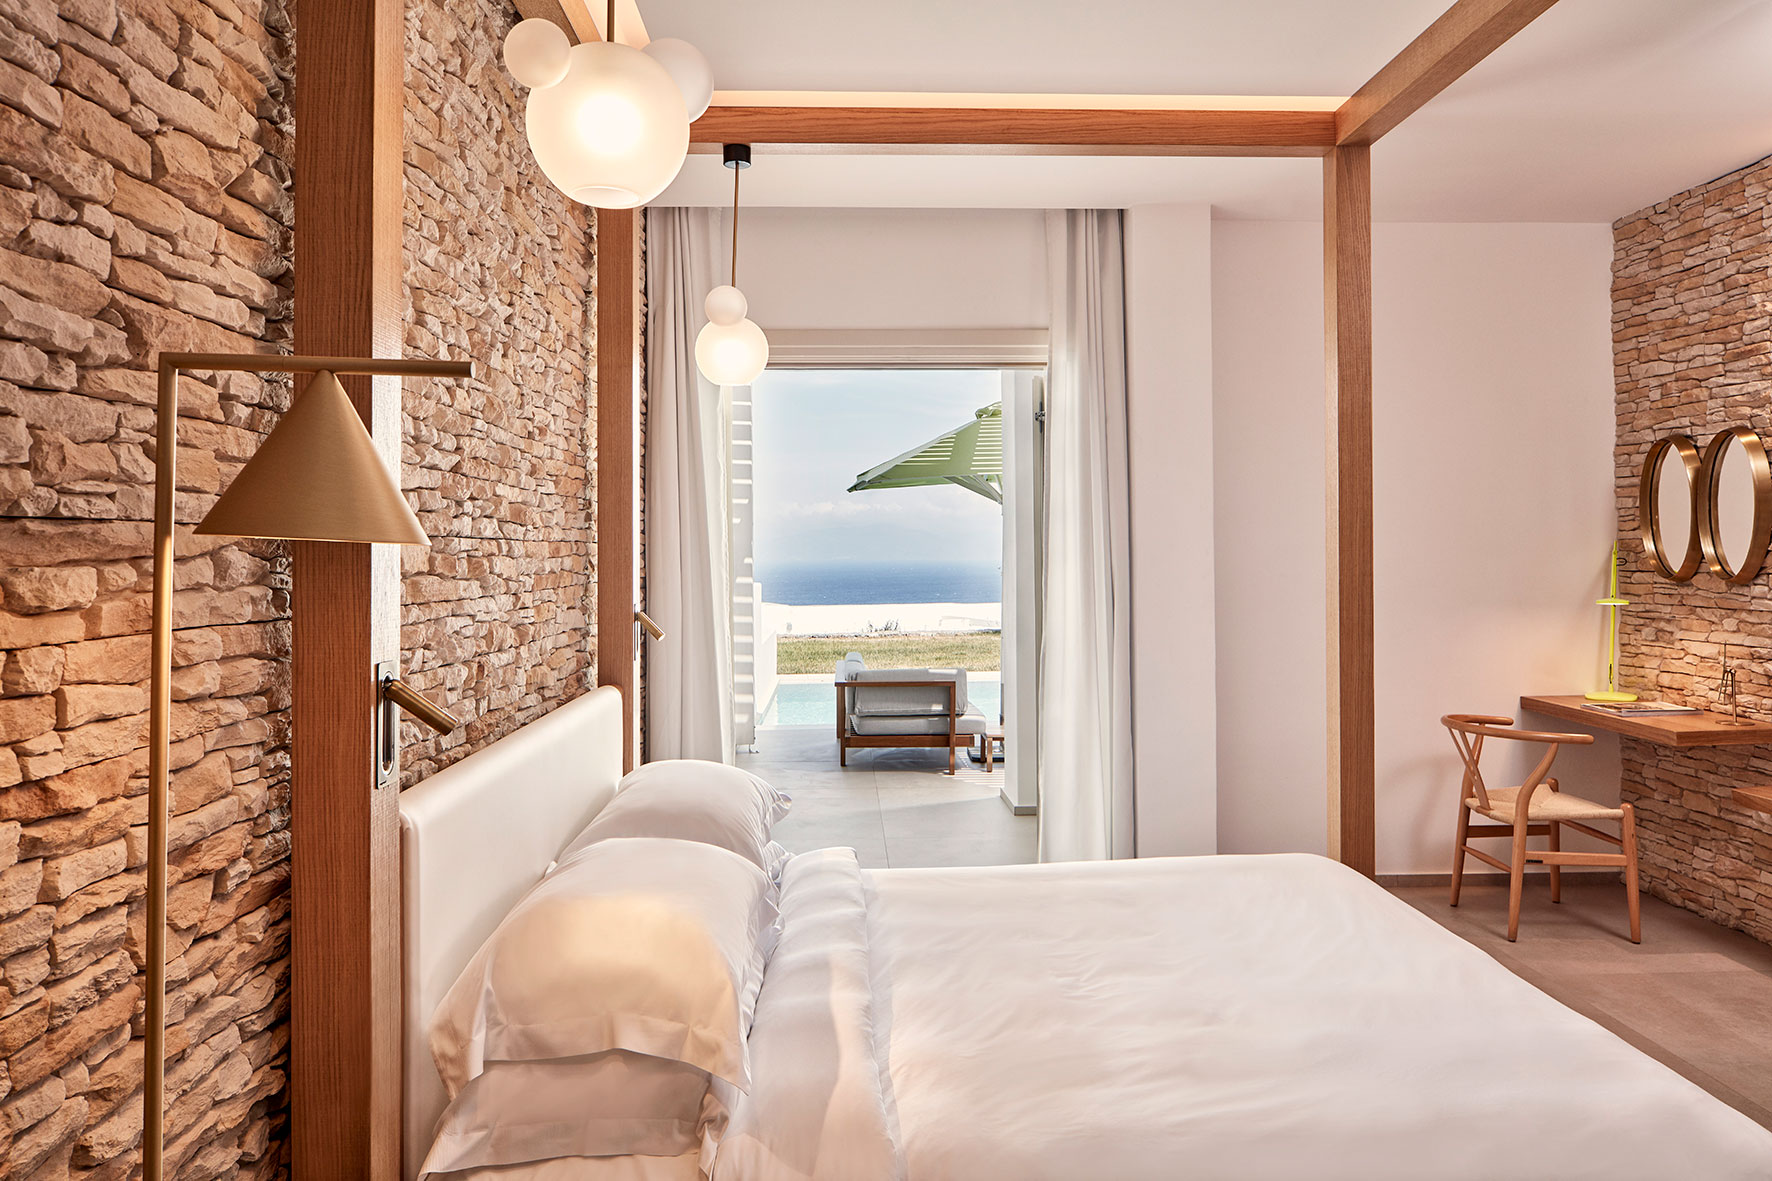 Naia Mykonos - bedroom with views of the beach